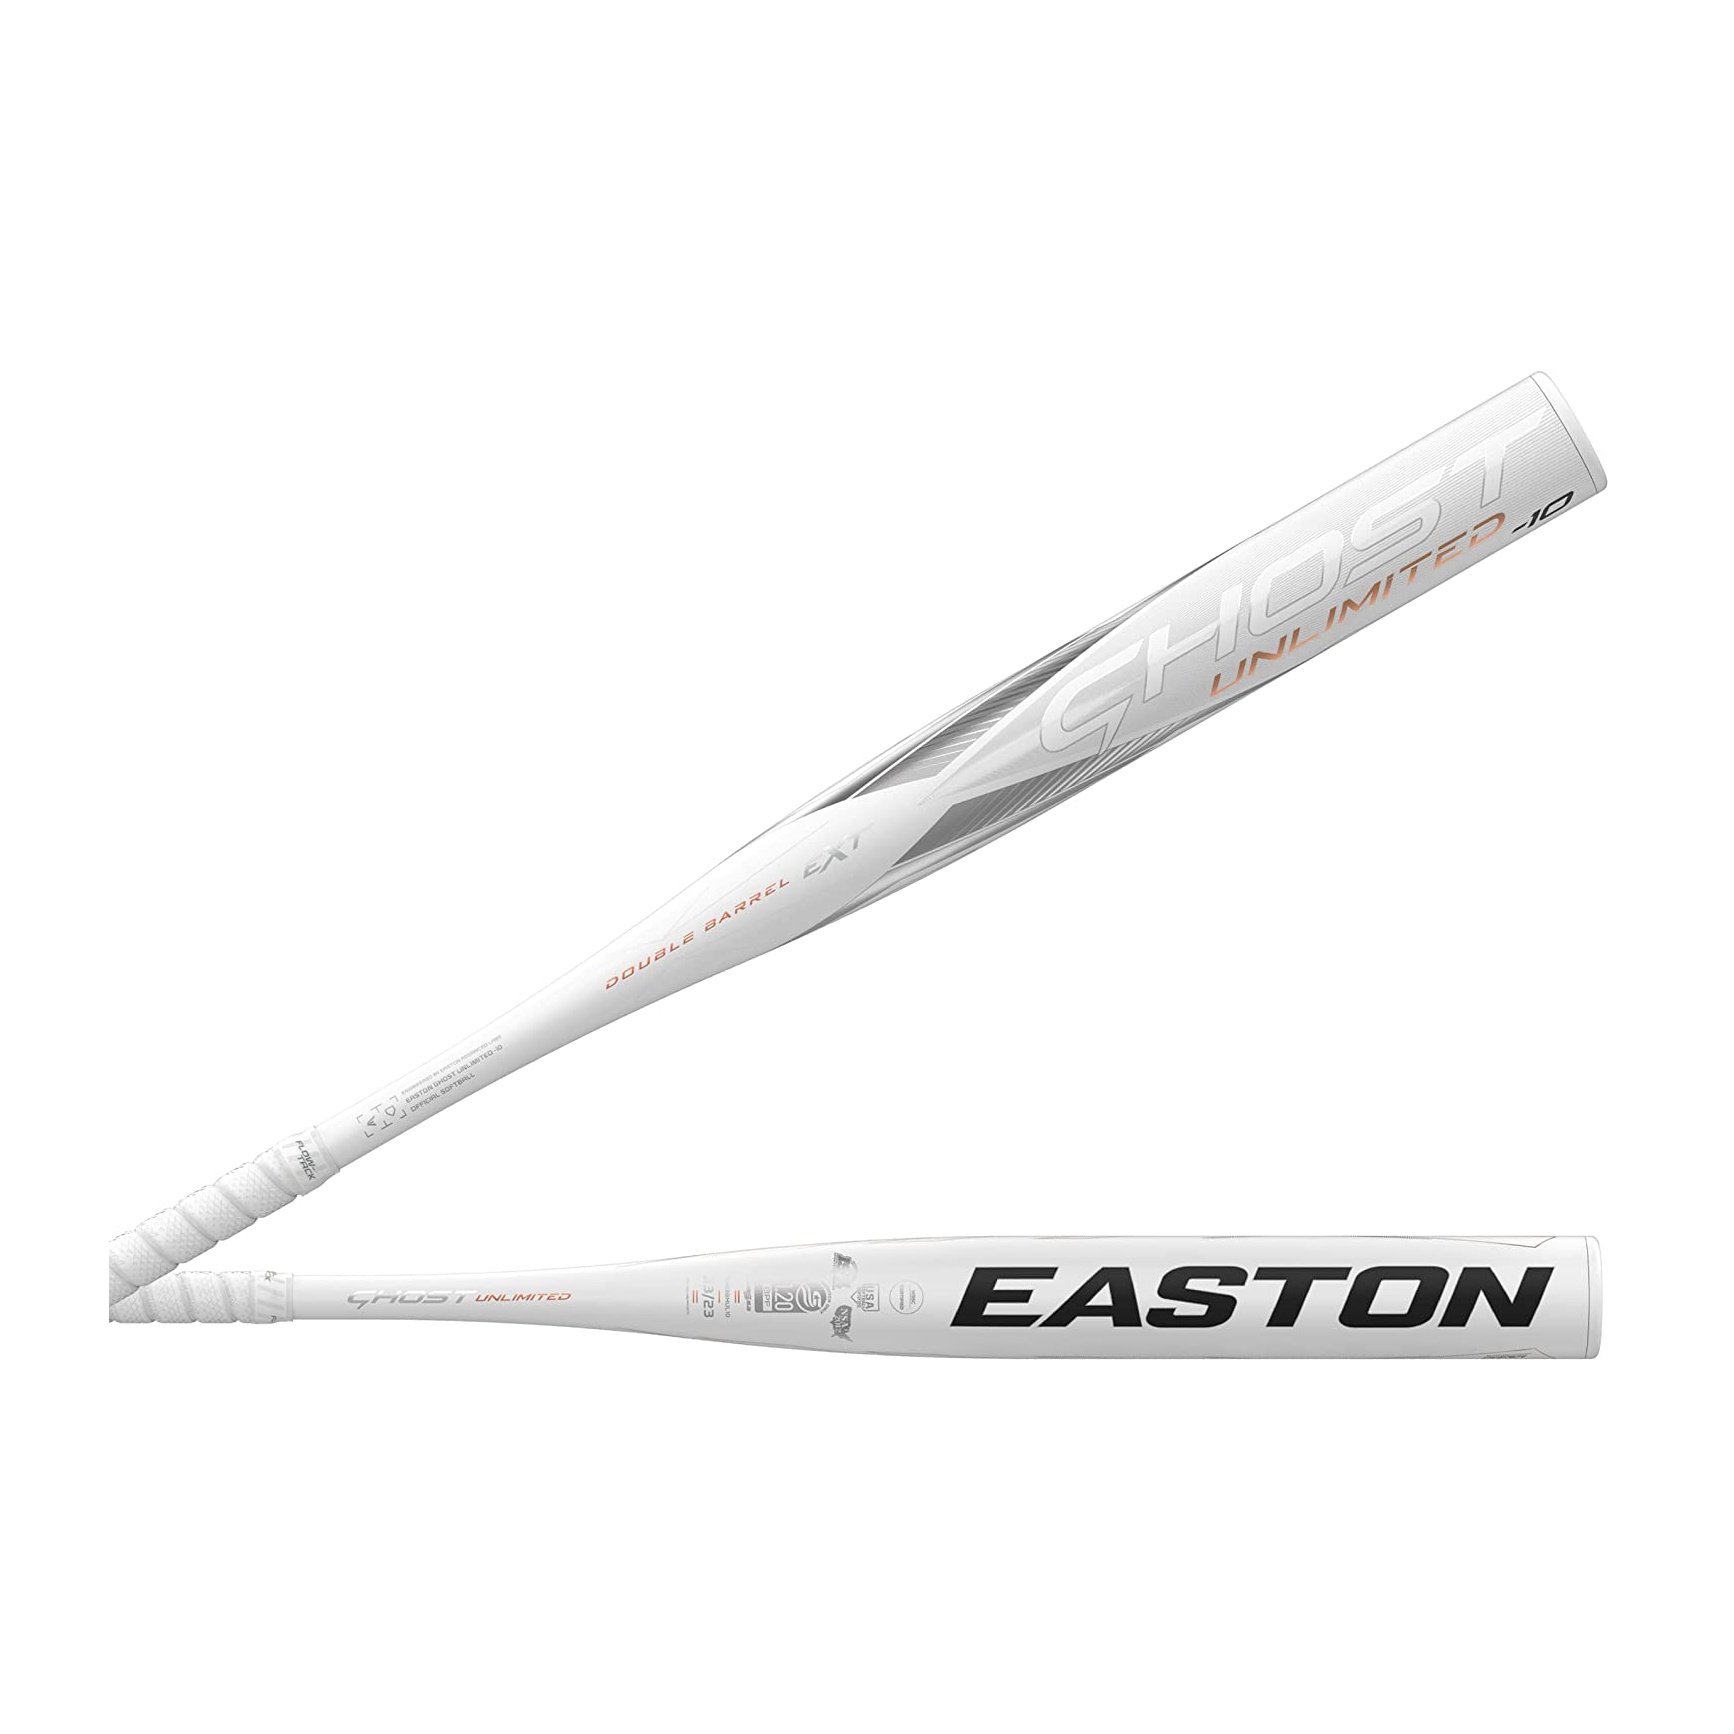 easton-ghost-unlimited-fp23ghul-10-fastpitch-softball-bat-32-inch-22-oz FP23GHUL10-3222 Easton 628412397527 Introducing the Easton Ghost Unlimited Fastpitch Softball Bat a true game-changer